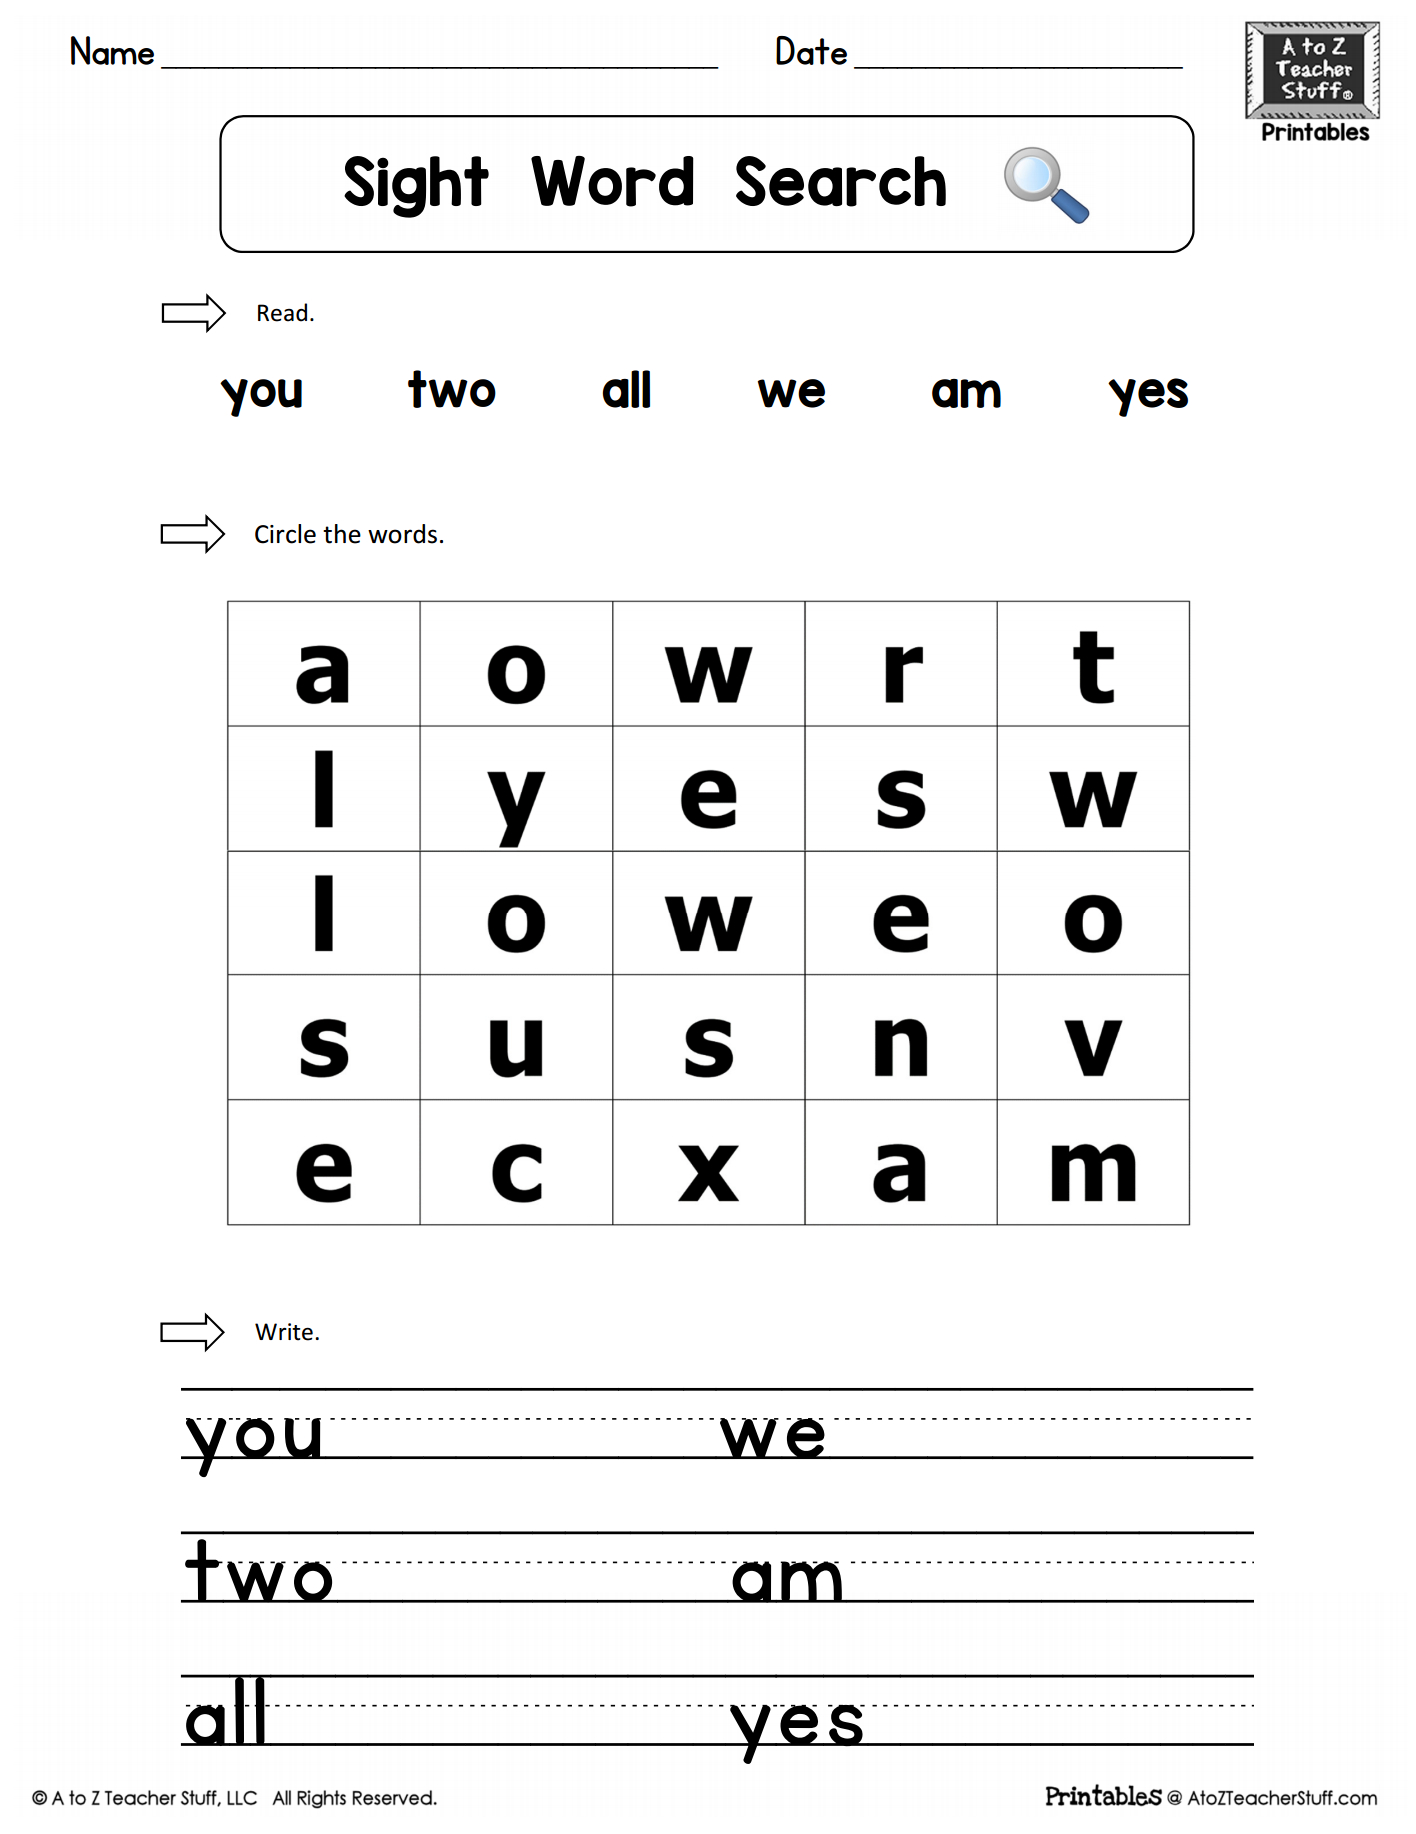 Sight Words Practice Word Search: You, Two, We, All, Am, Yes